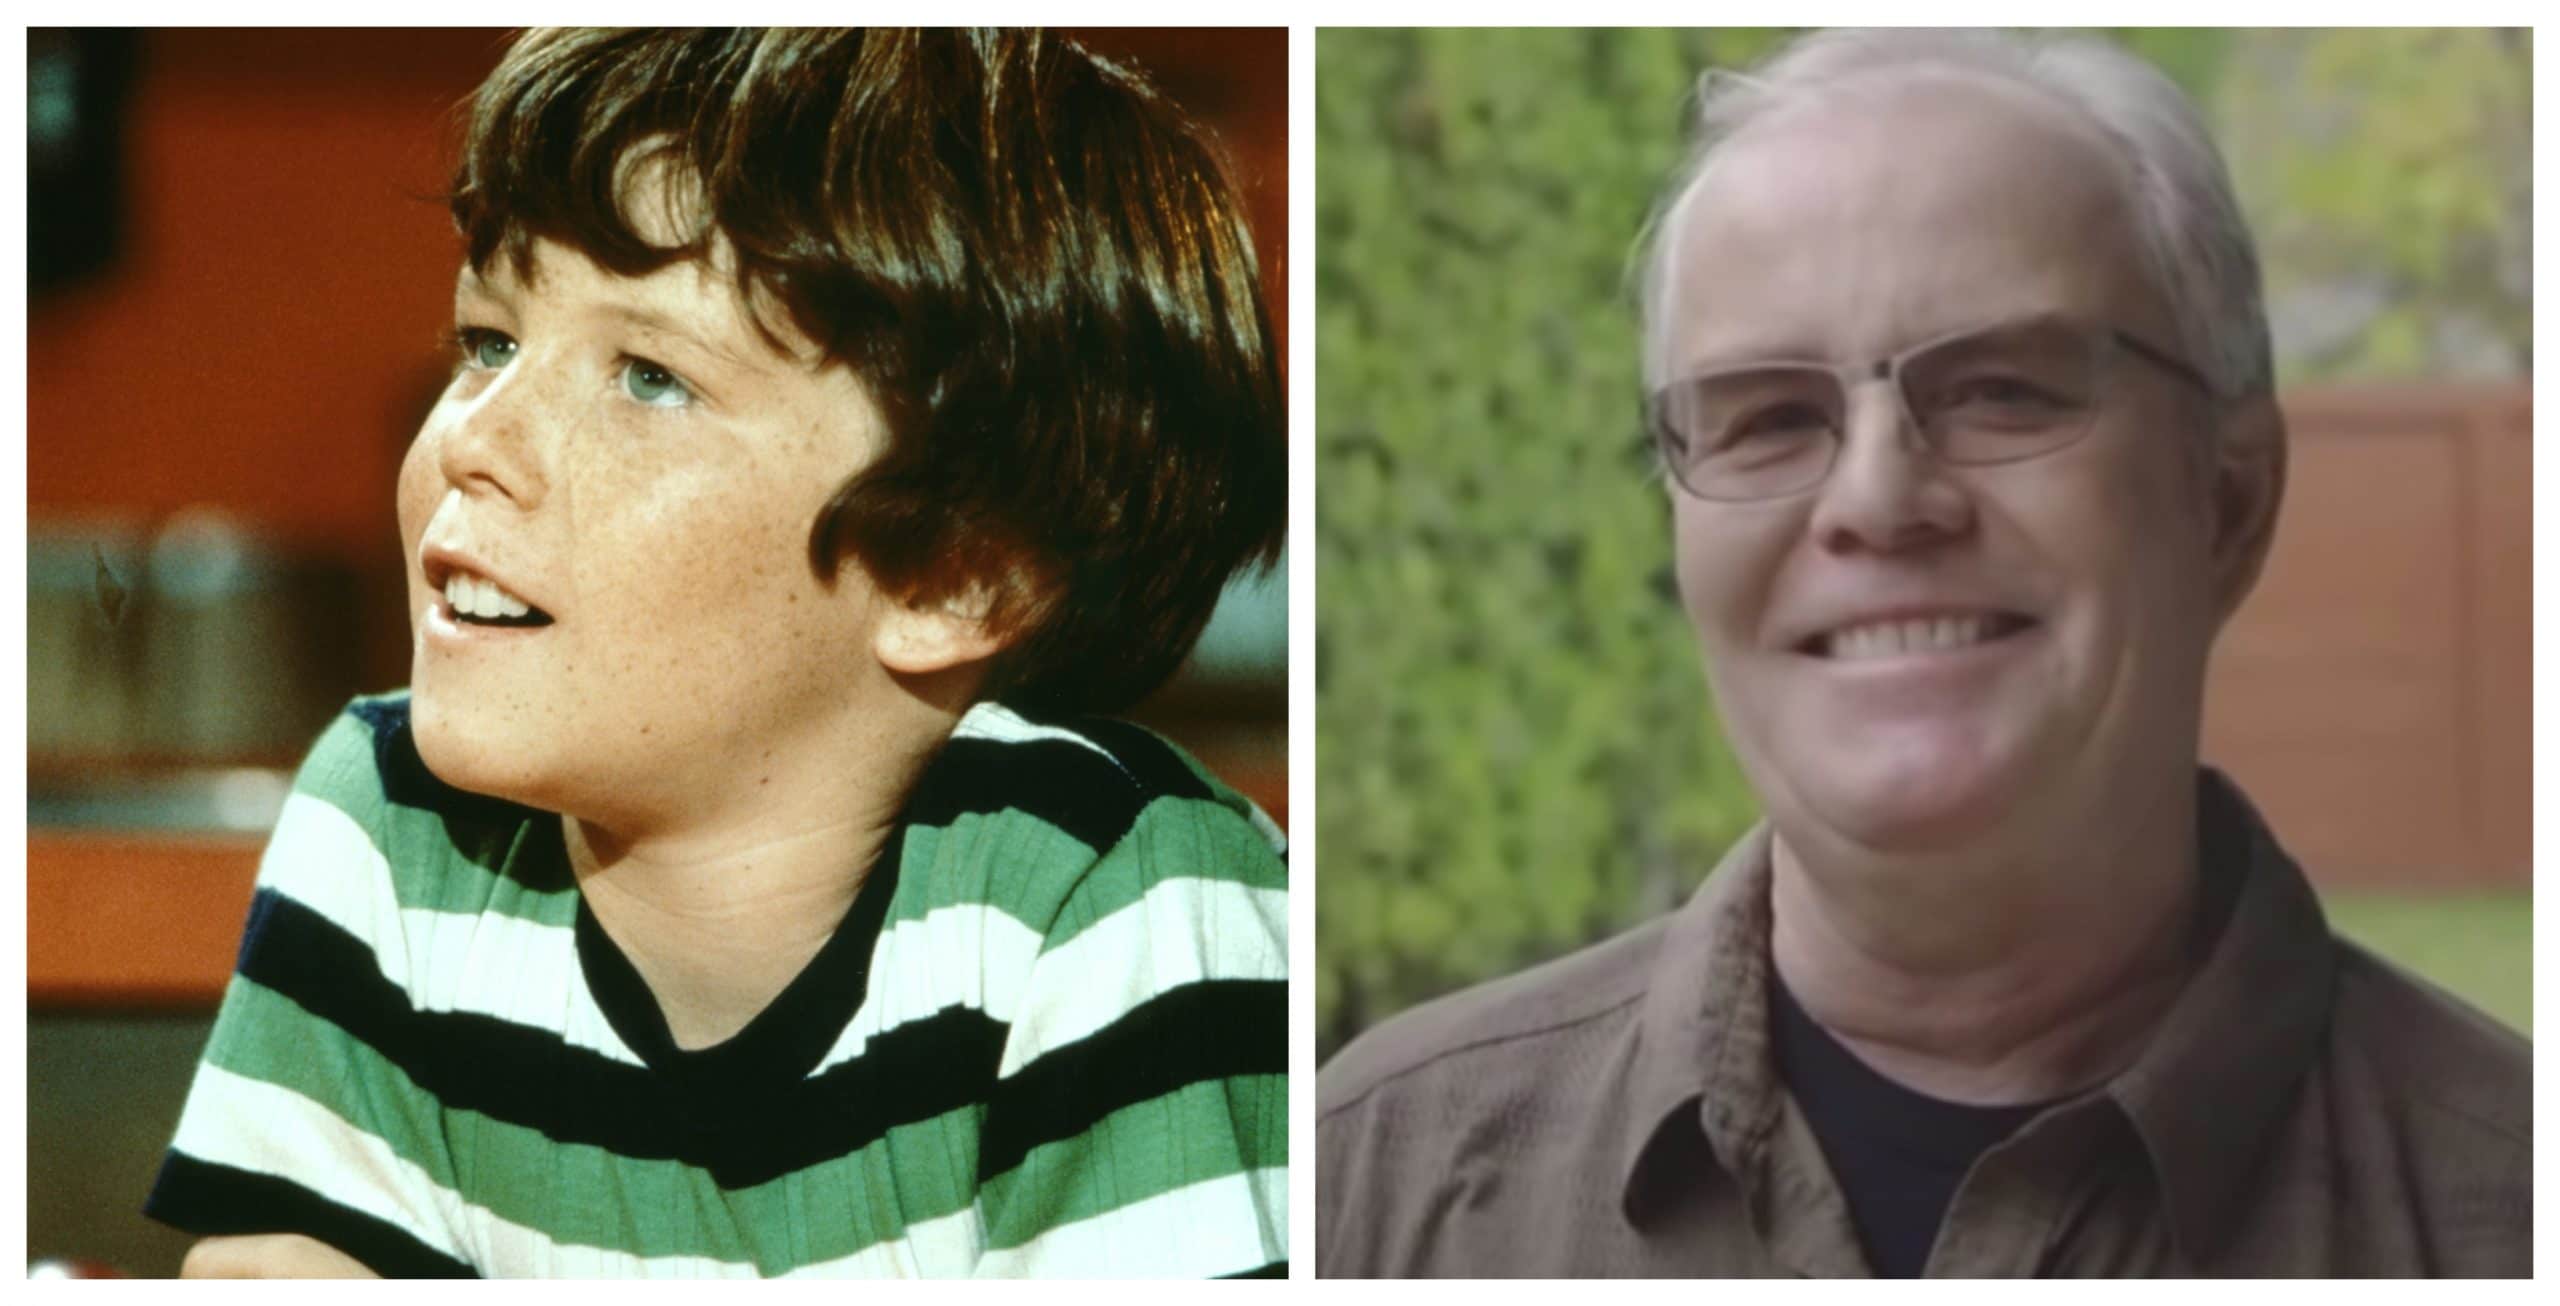 The Cast Of 'The Brady Bunch' Then And Now 2021